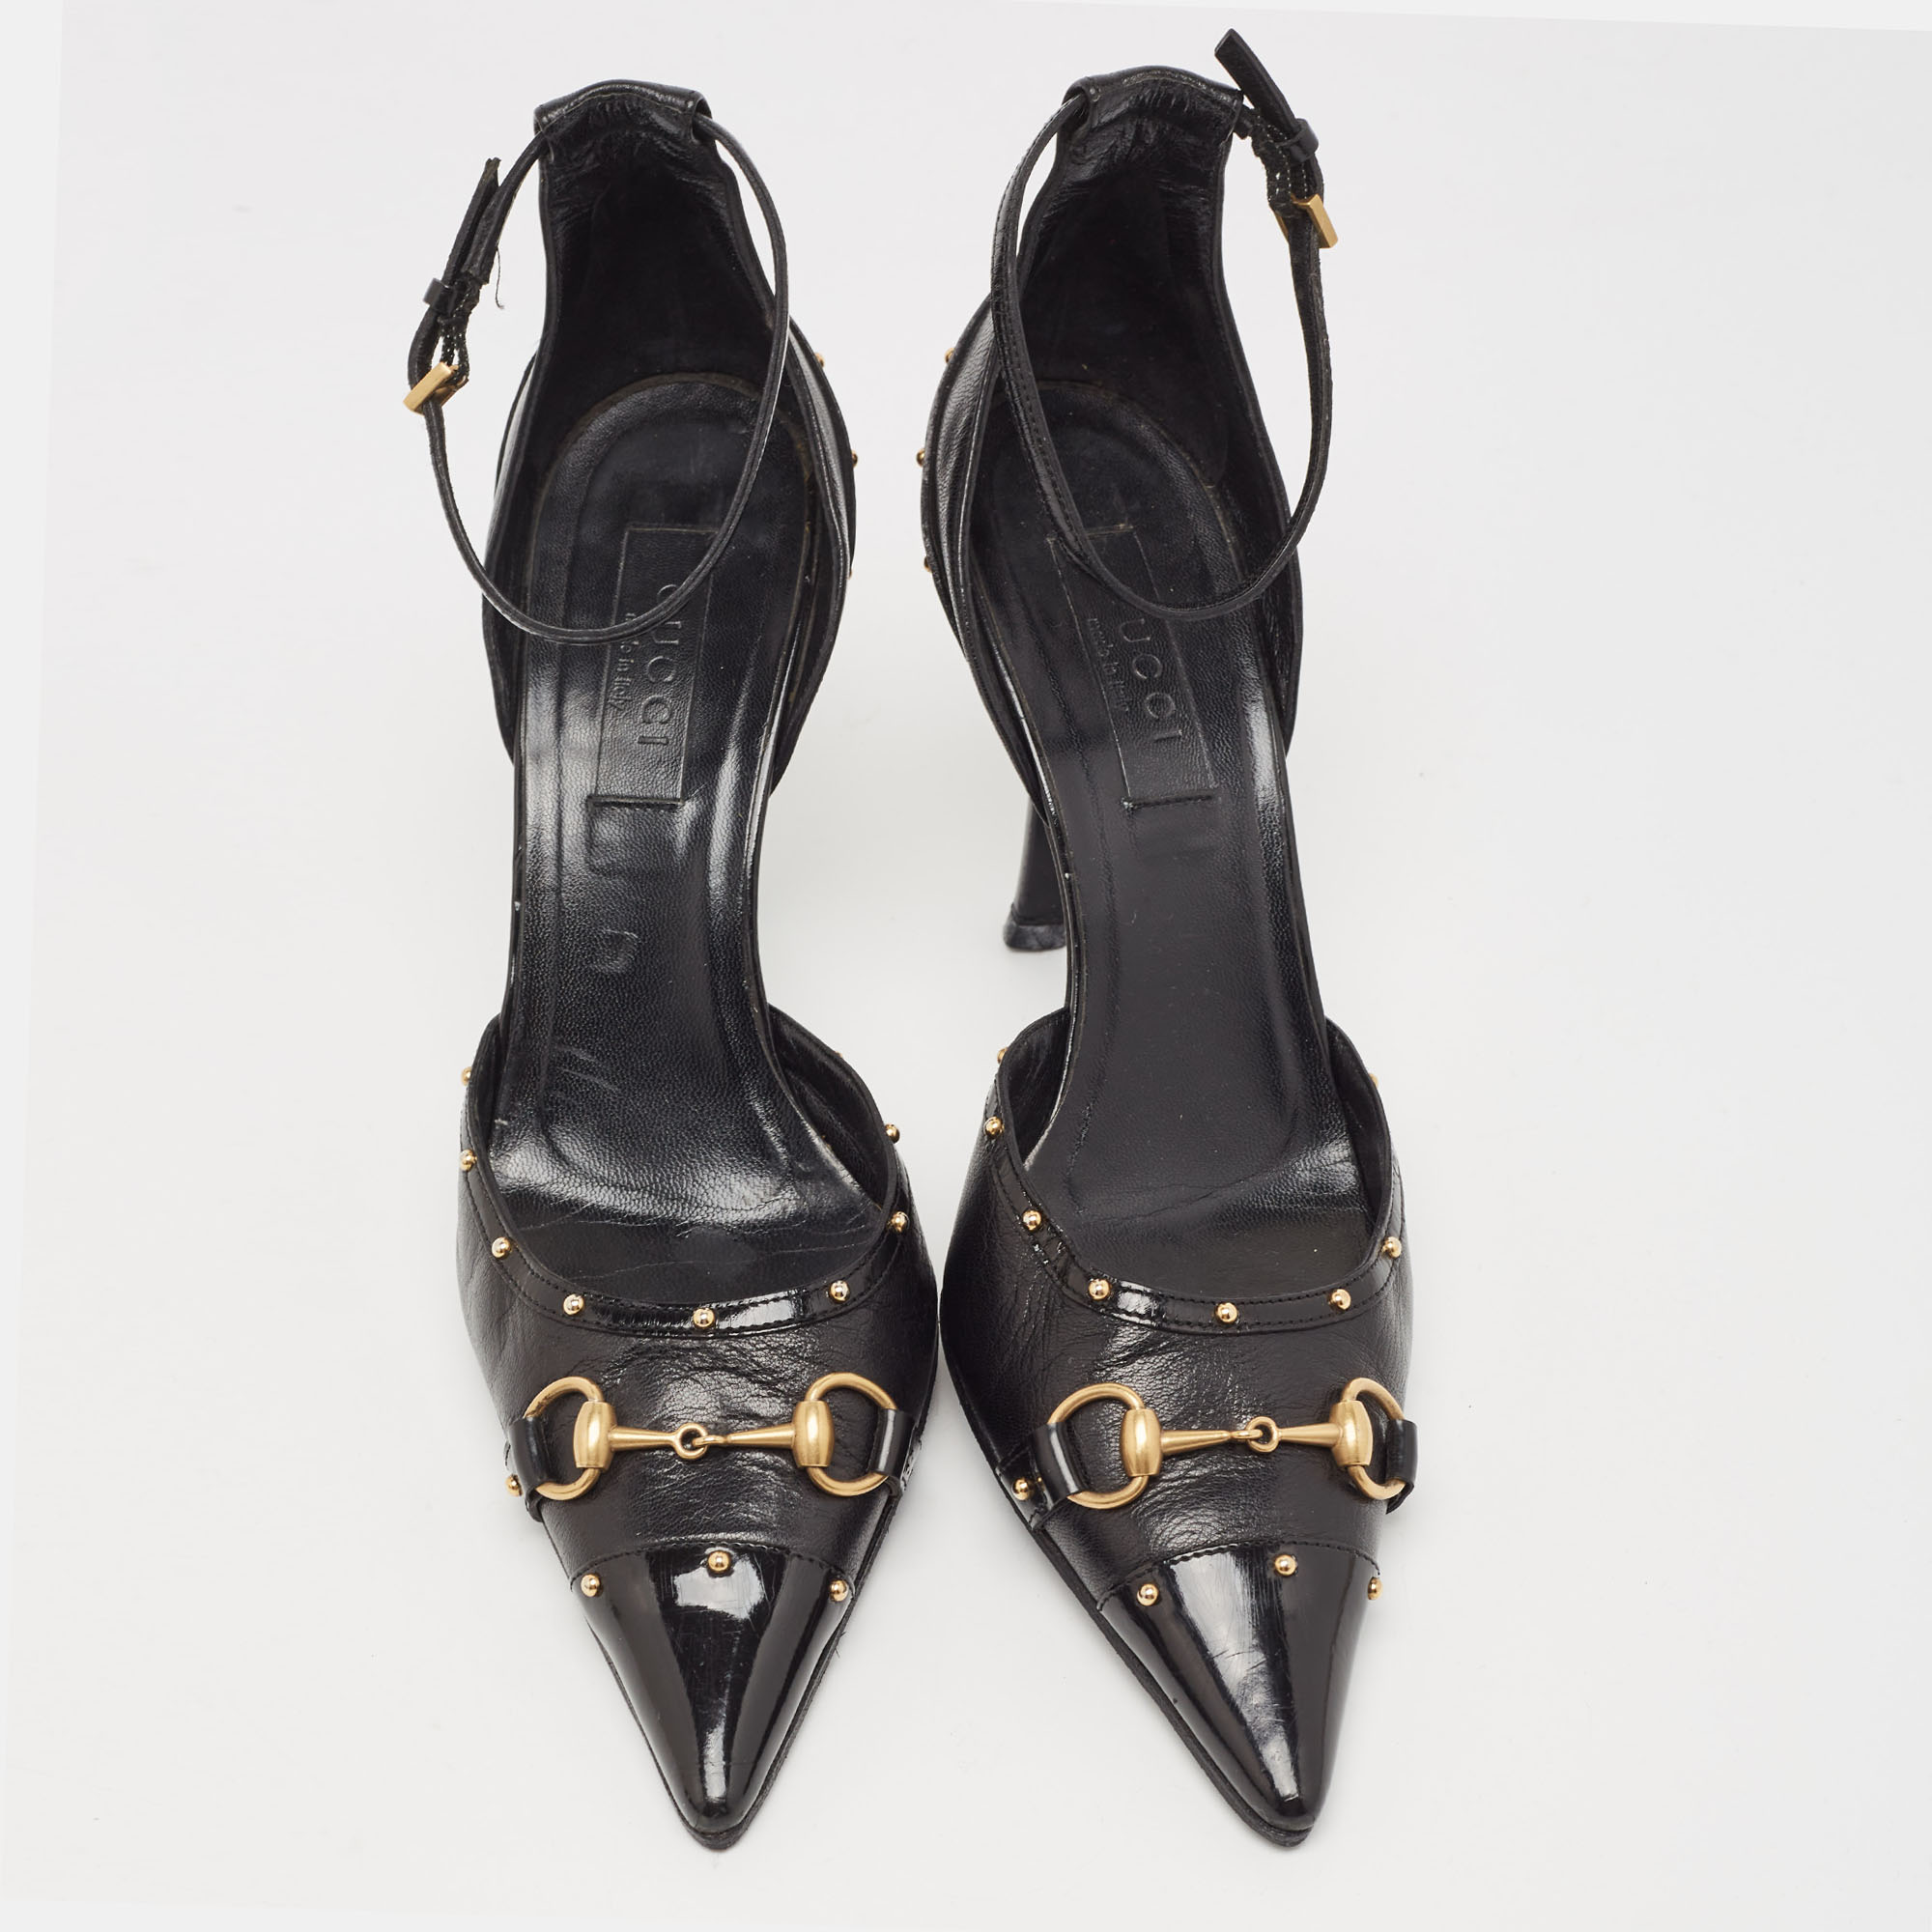 Gucci Black Leather Horsebit Studded Pointed Toe Ankle Strap Pumps Size 36